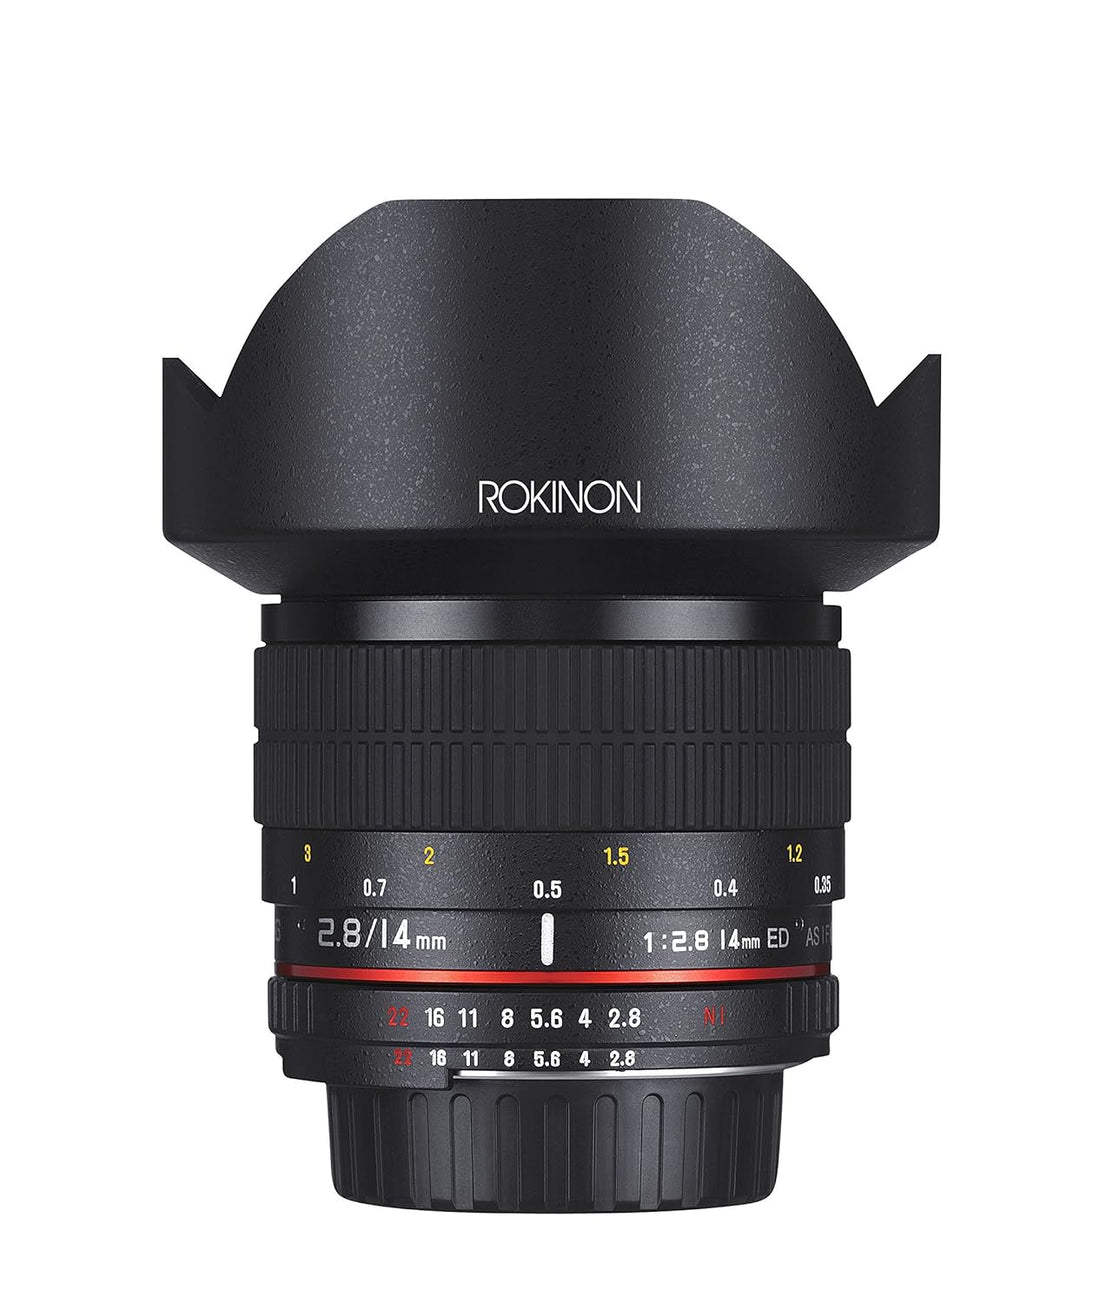 Rokinon FE14MAF-N 14 mm f/2.8 IF ED UMC Ultra Wide Angle Fixed Lens with Built-in AE Chip for Nikon (Black)